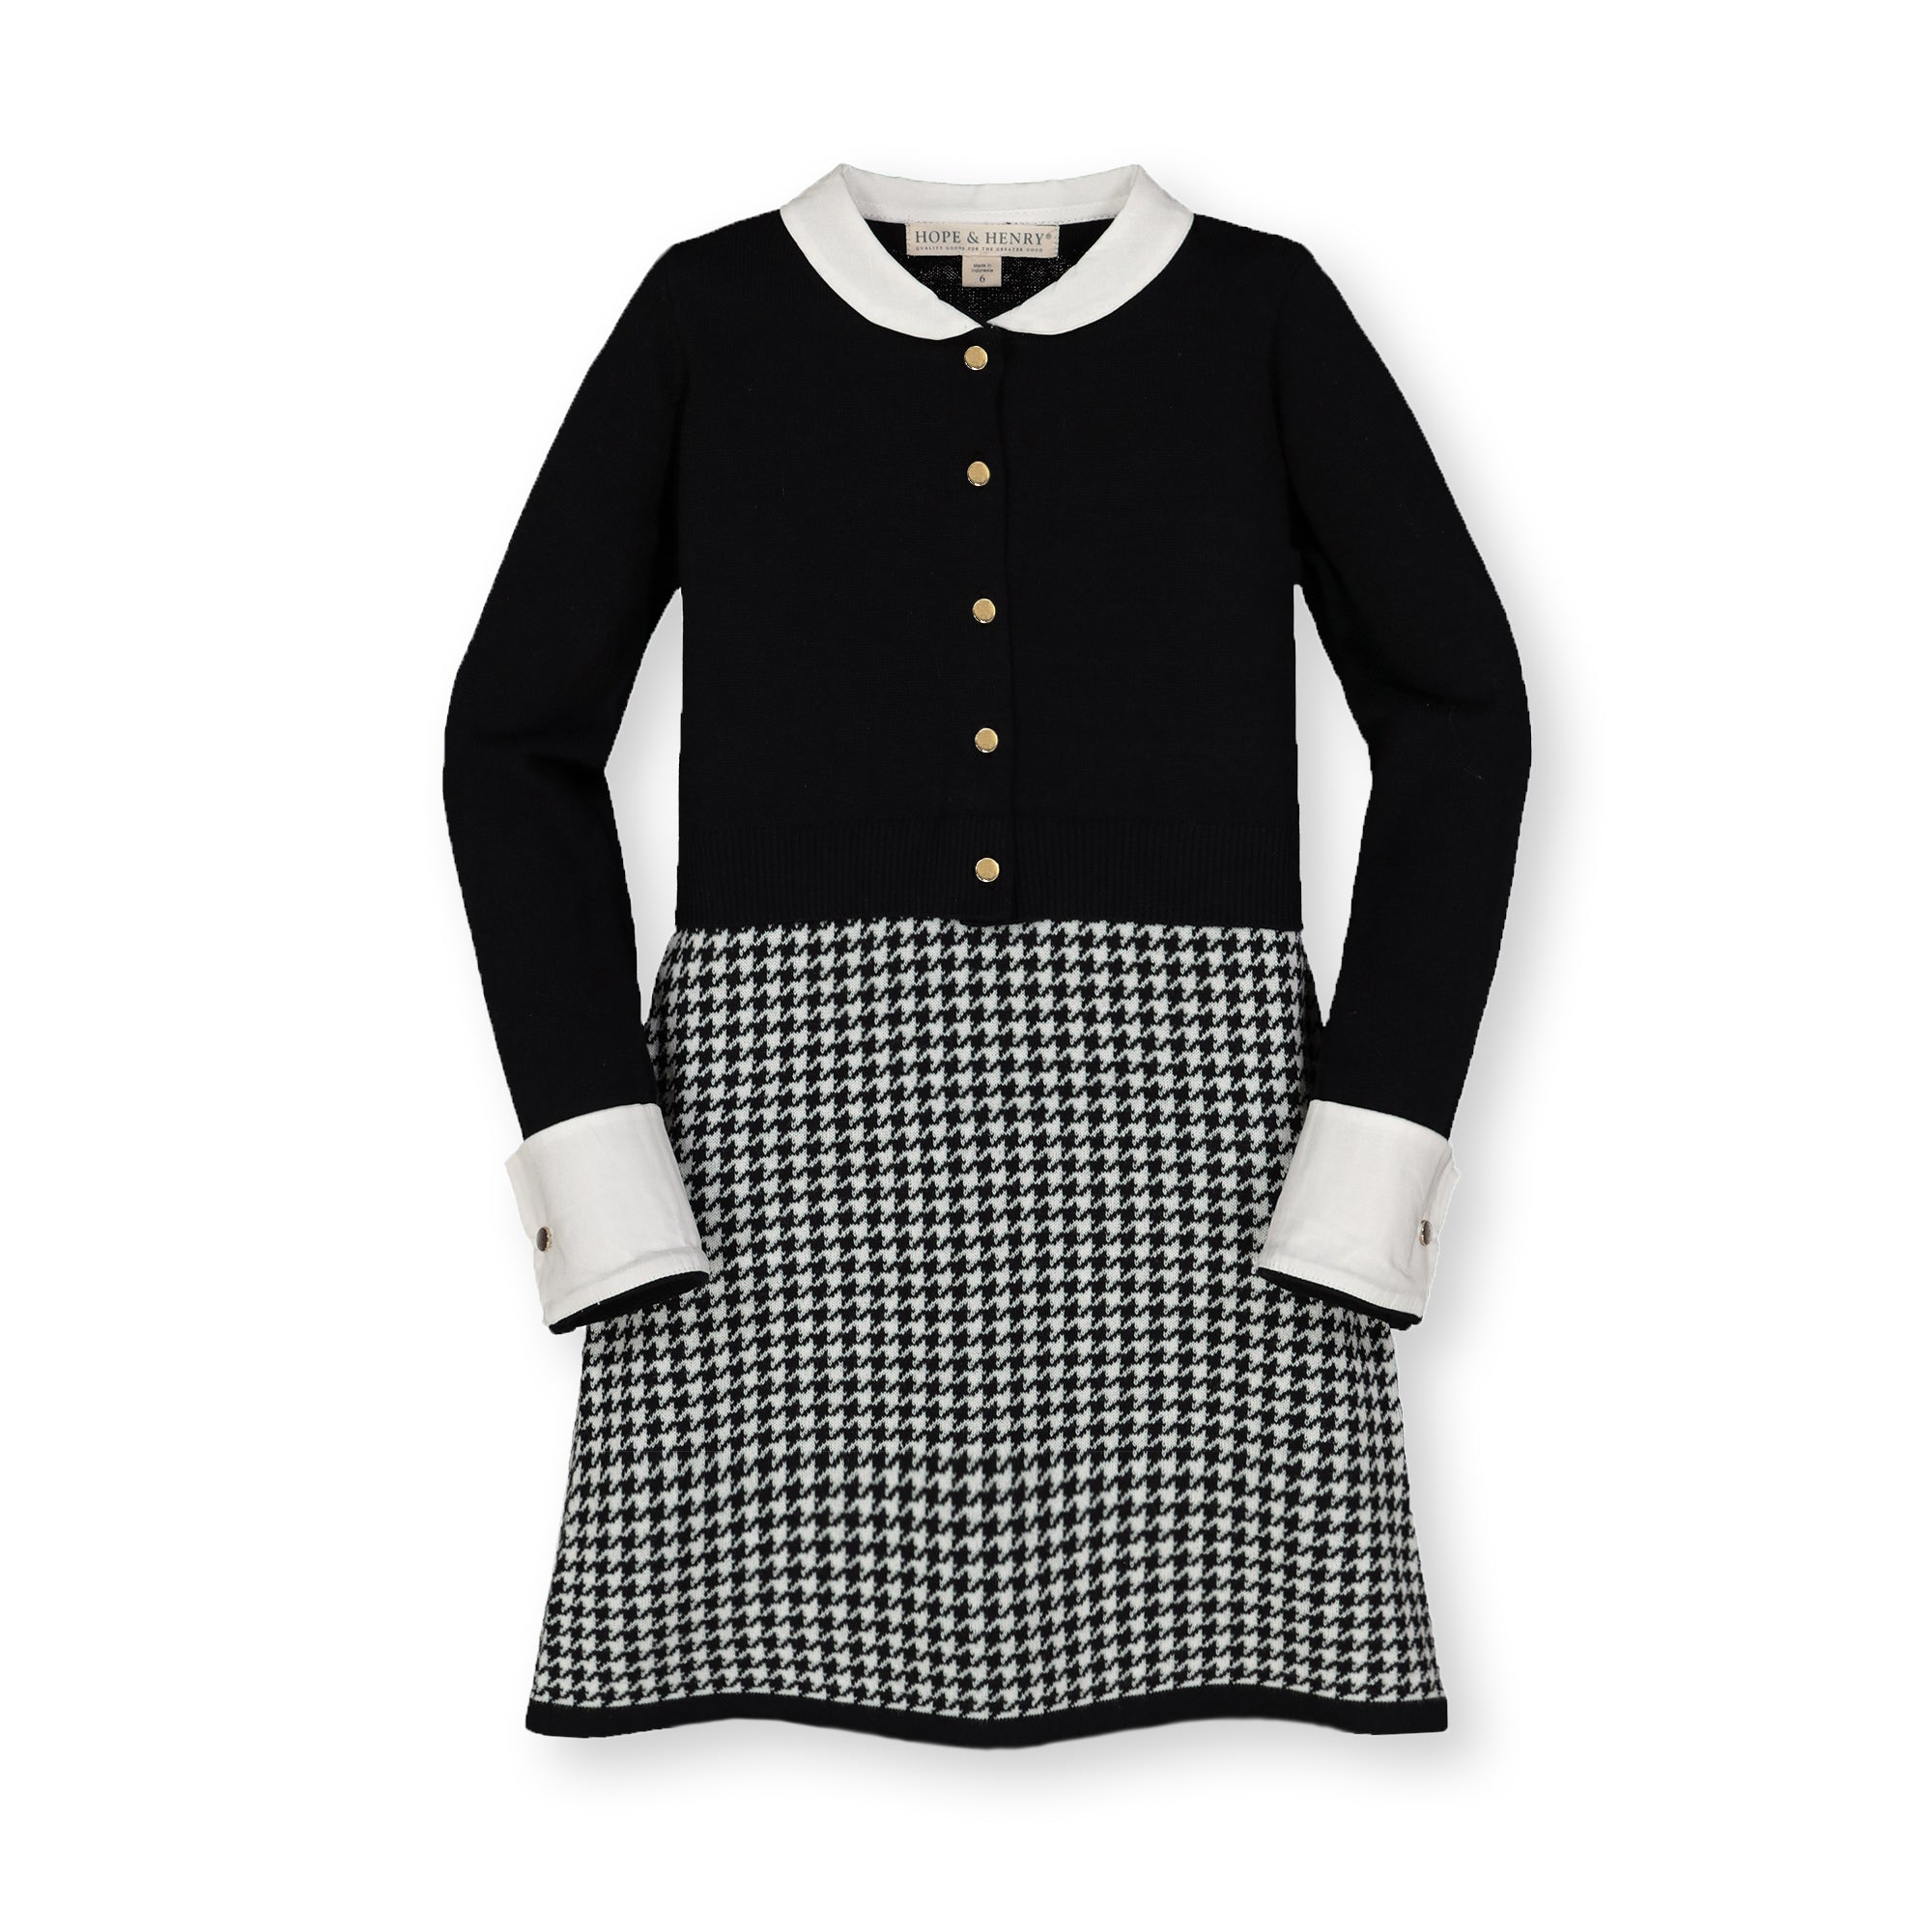 Button Front Sweater Dress with Collar | Hope u0026 Henry Girl